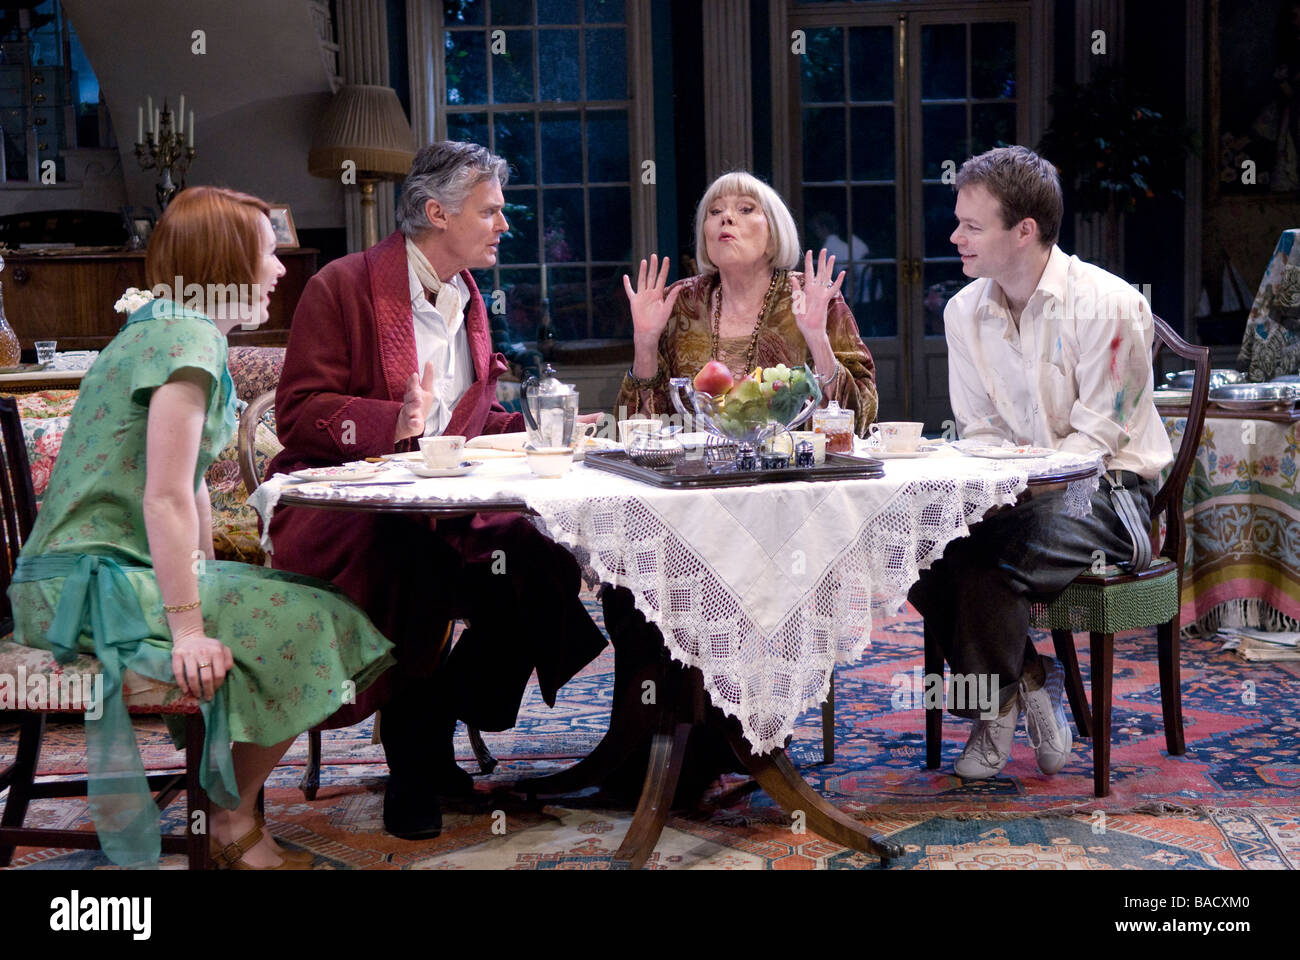 Scene from the play Hay Fever by Noel Coward, Chichester Festival Theatre, UK April 2009 Stock Photo